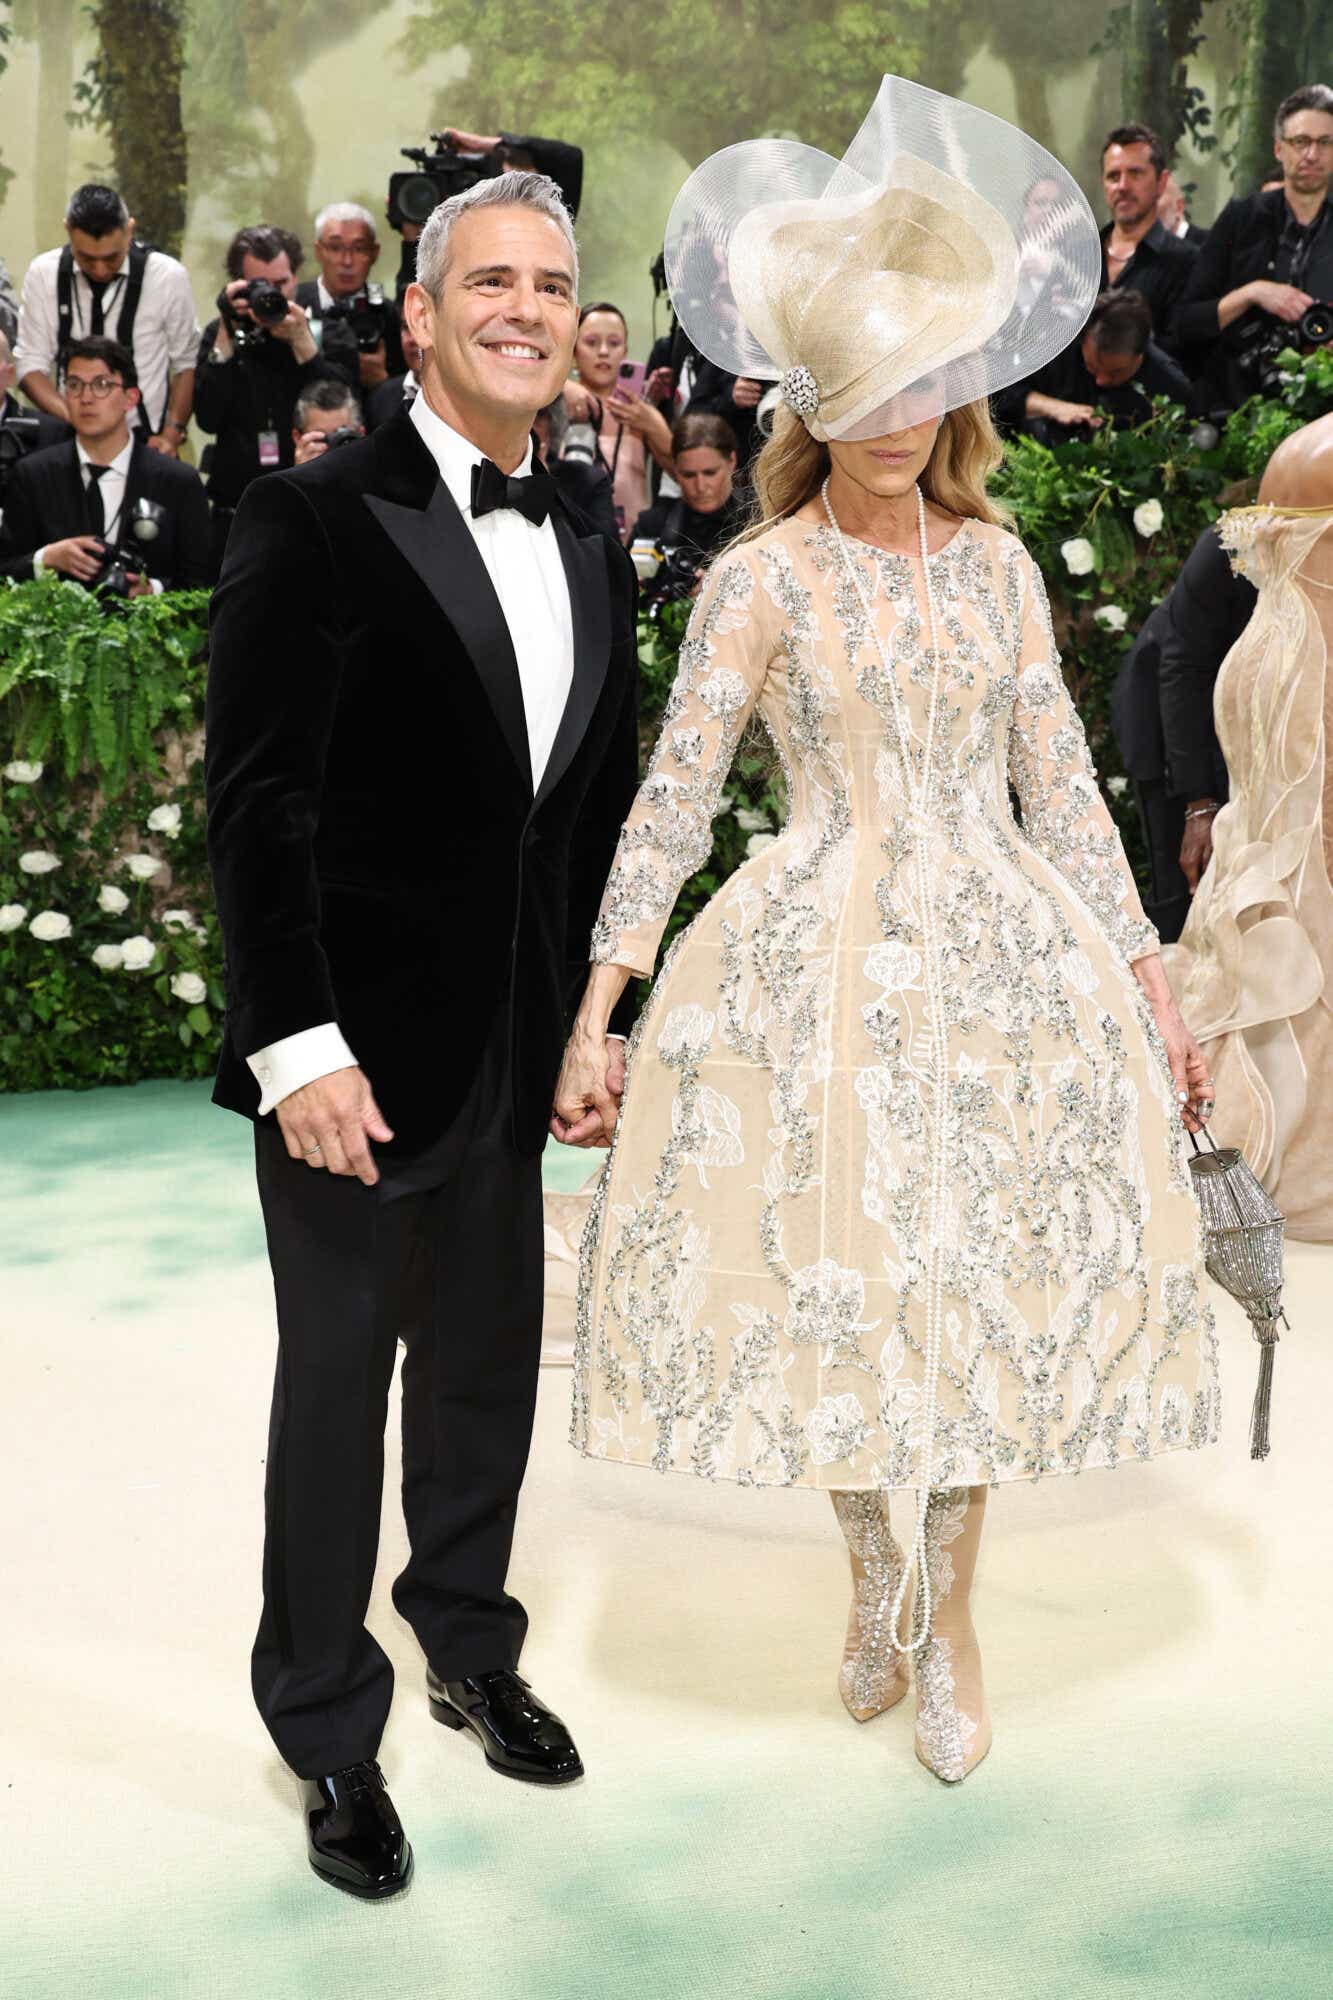 Andy Cohen wears a black tux. Sarah Jessica Parker wears an elaborately embroidered cream tea-length gown with a matching fascinator that covers one of her eyes.